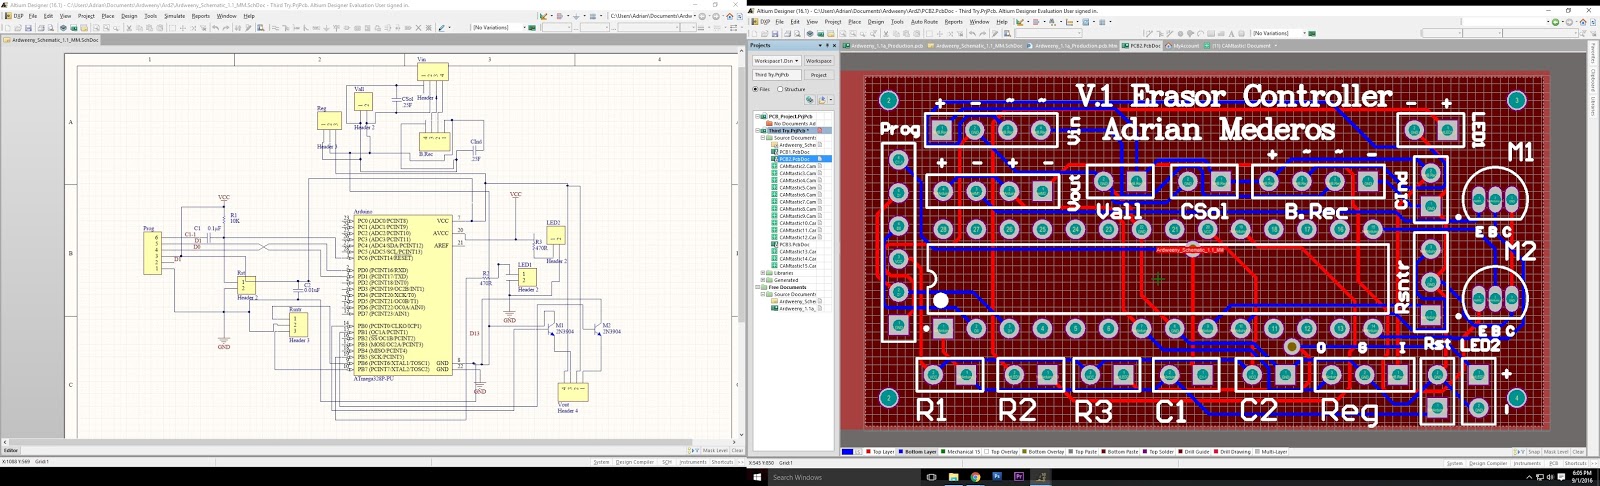 Learning PCB design in one week - We have the Technology